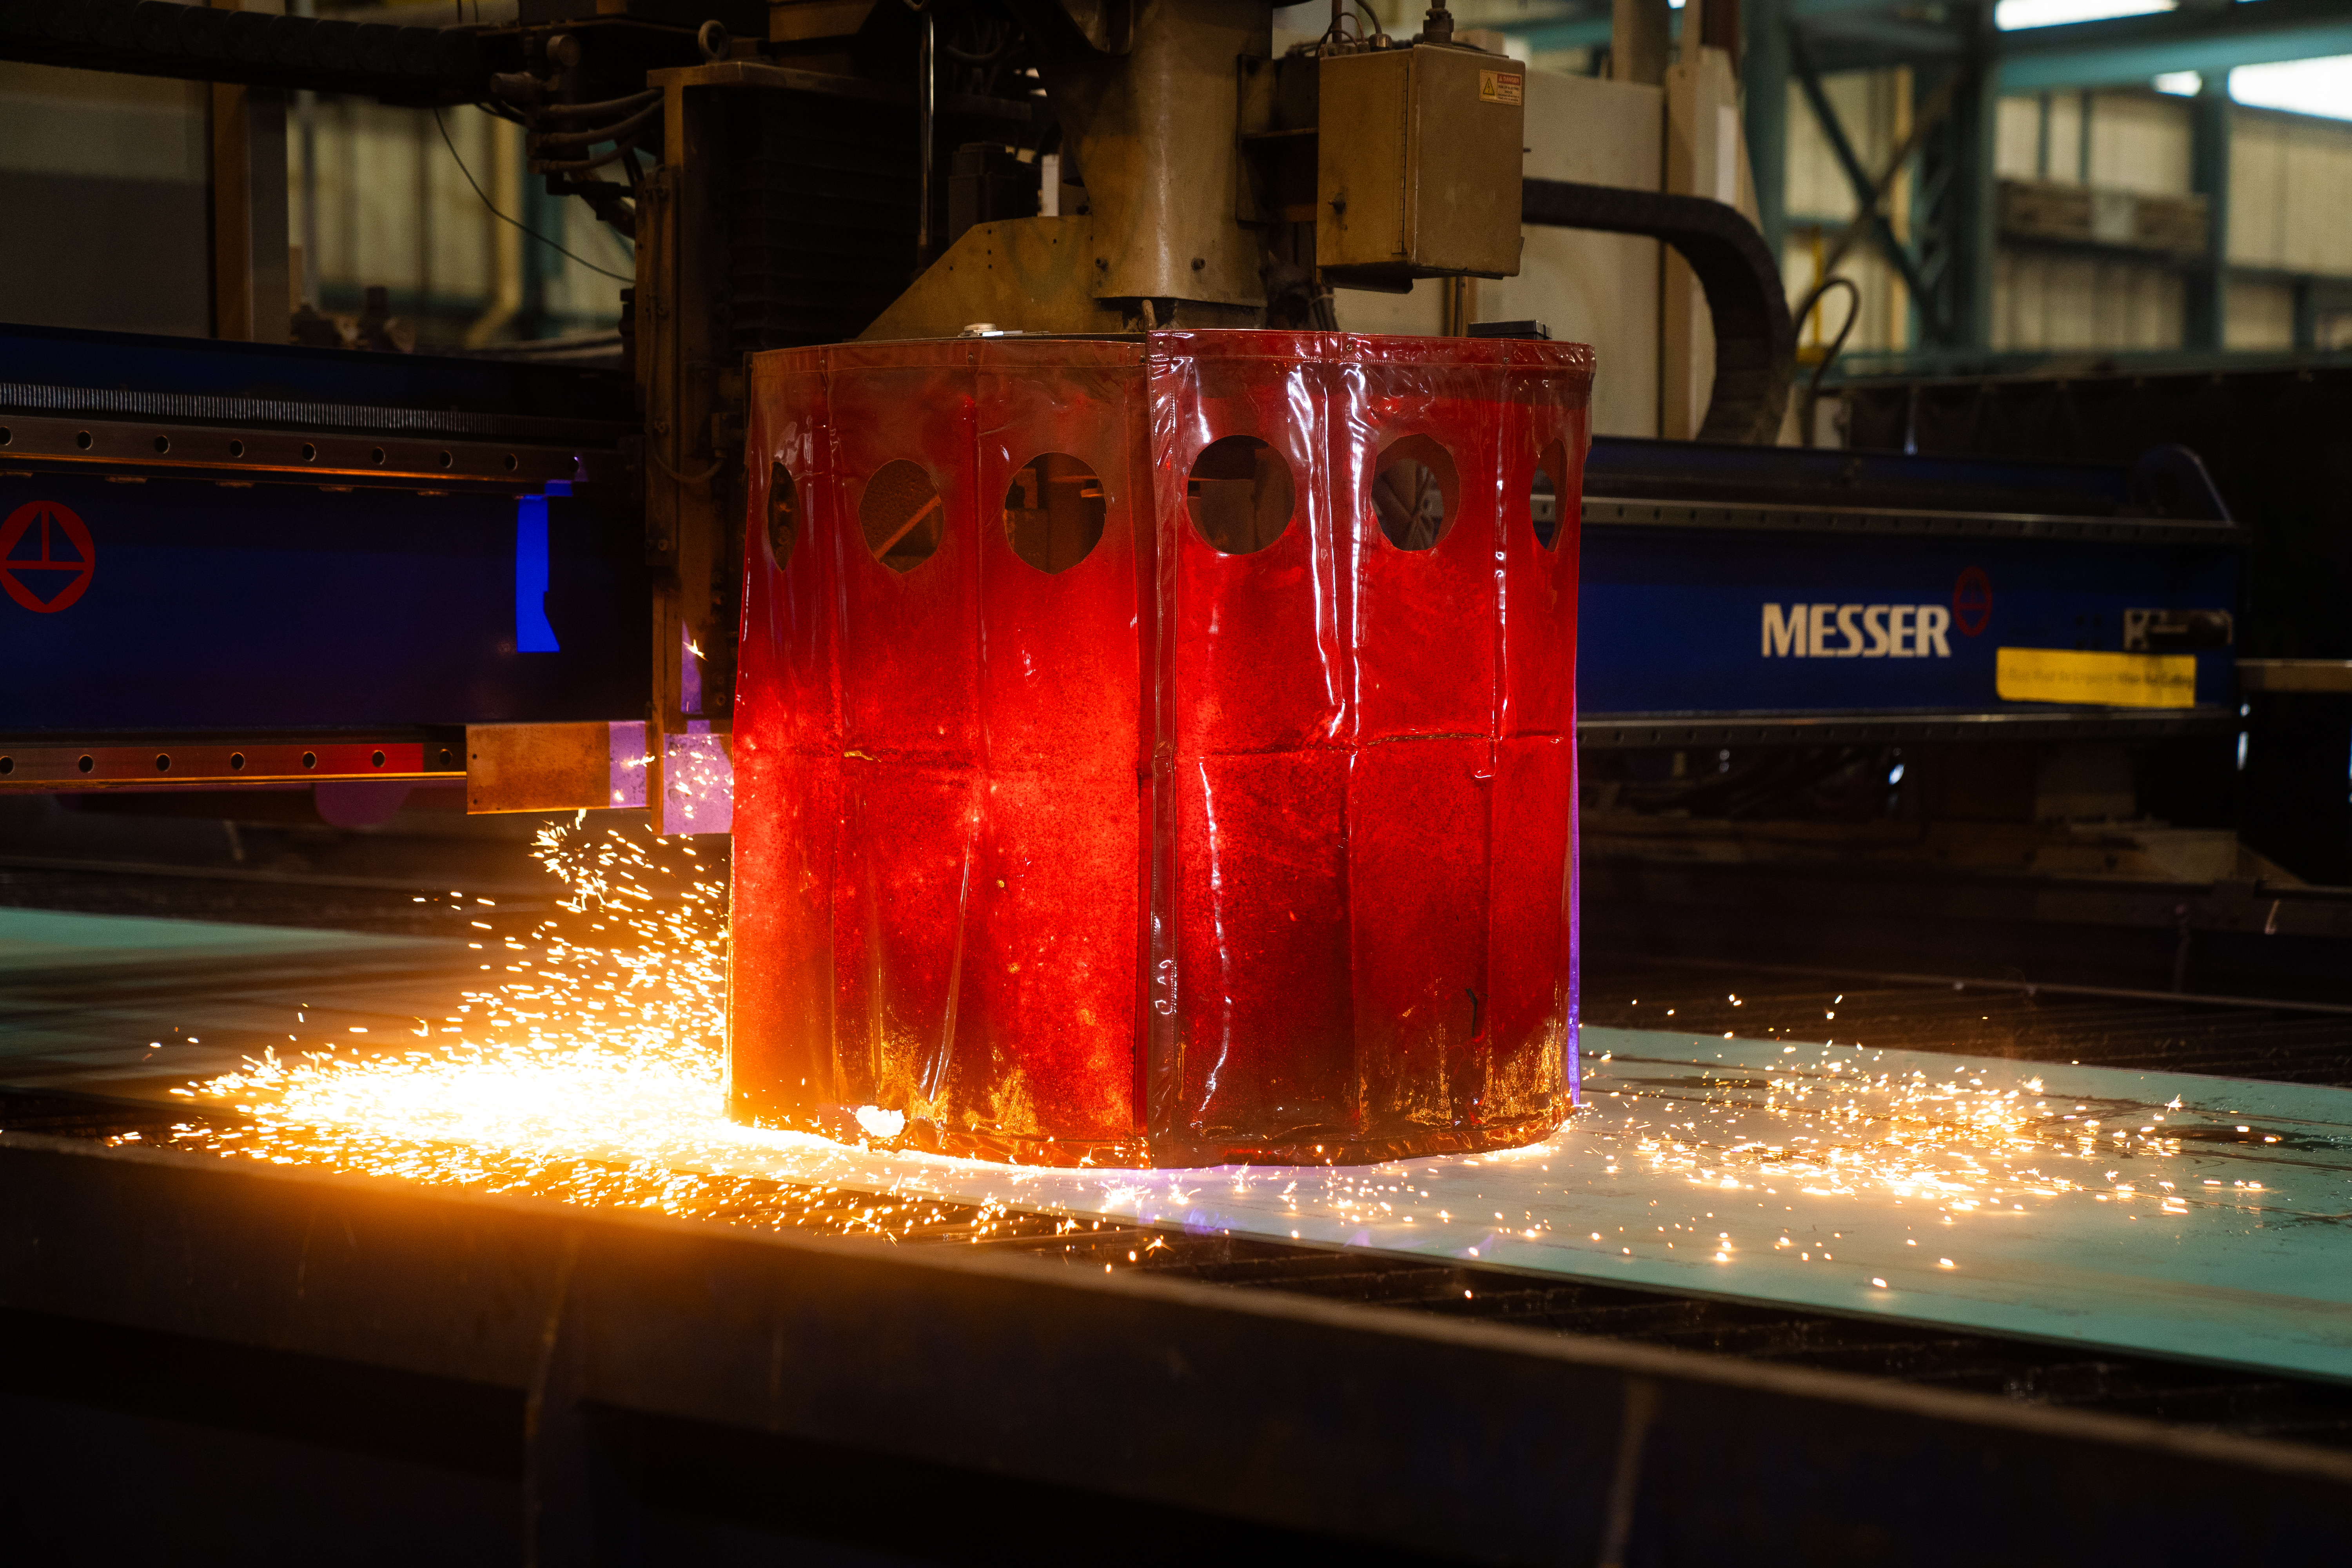 The steel cutting ceremony signifies the start of production for a vessel and takes place at Philly Shipyard’s plasma cutting machine. Everyone watched as the machine was started and the plasma steel cutting process began.